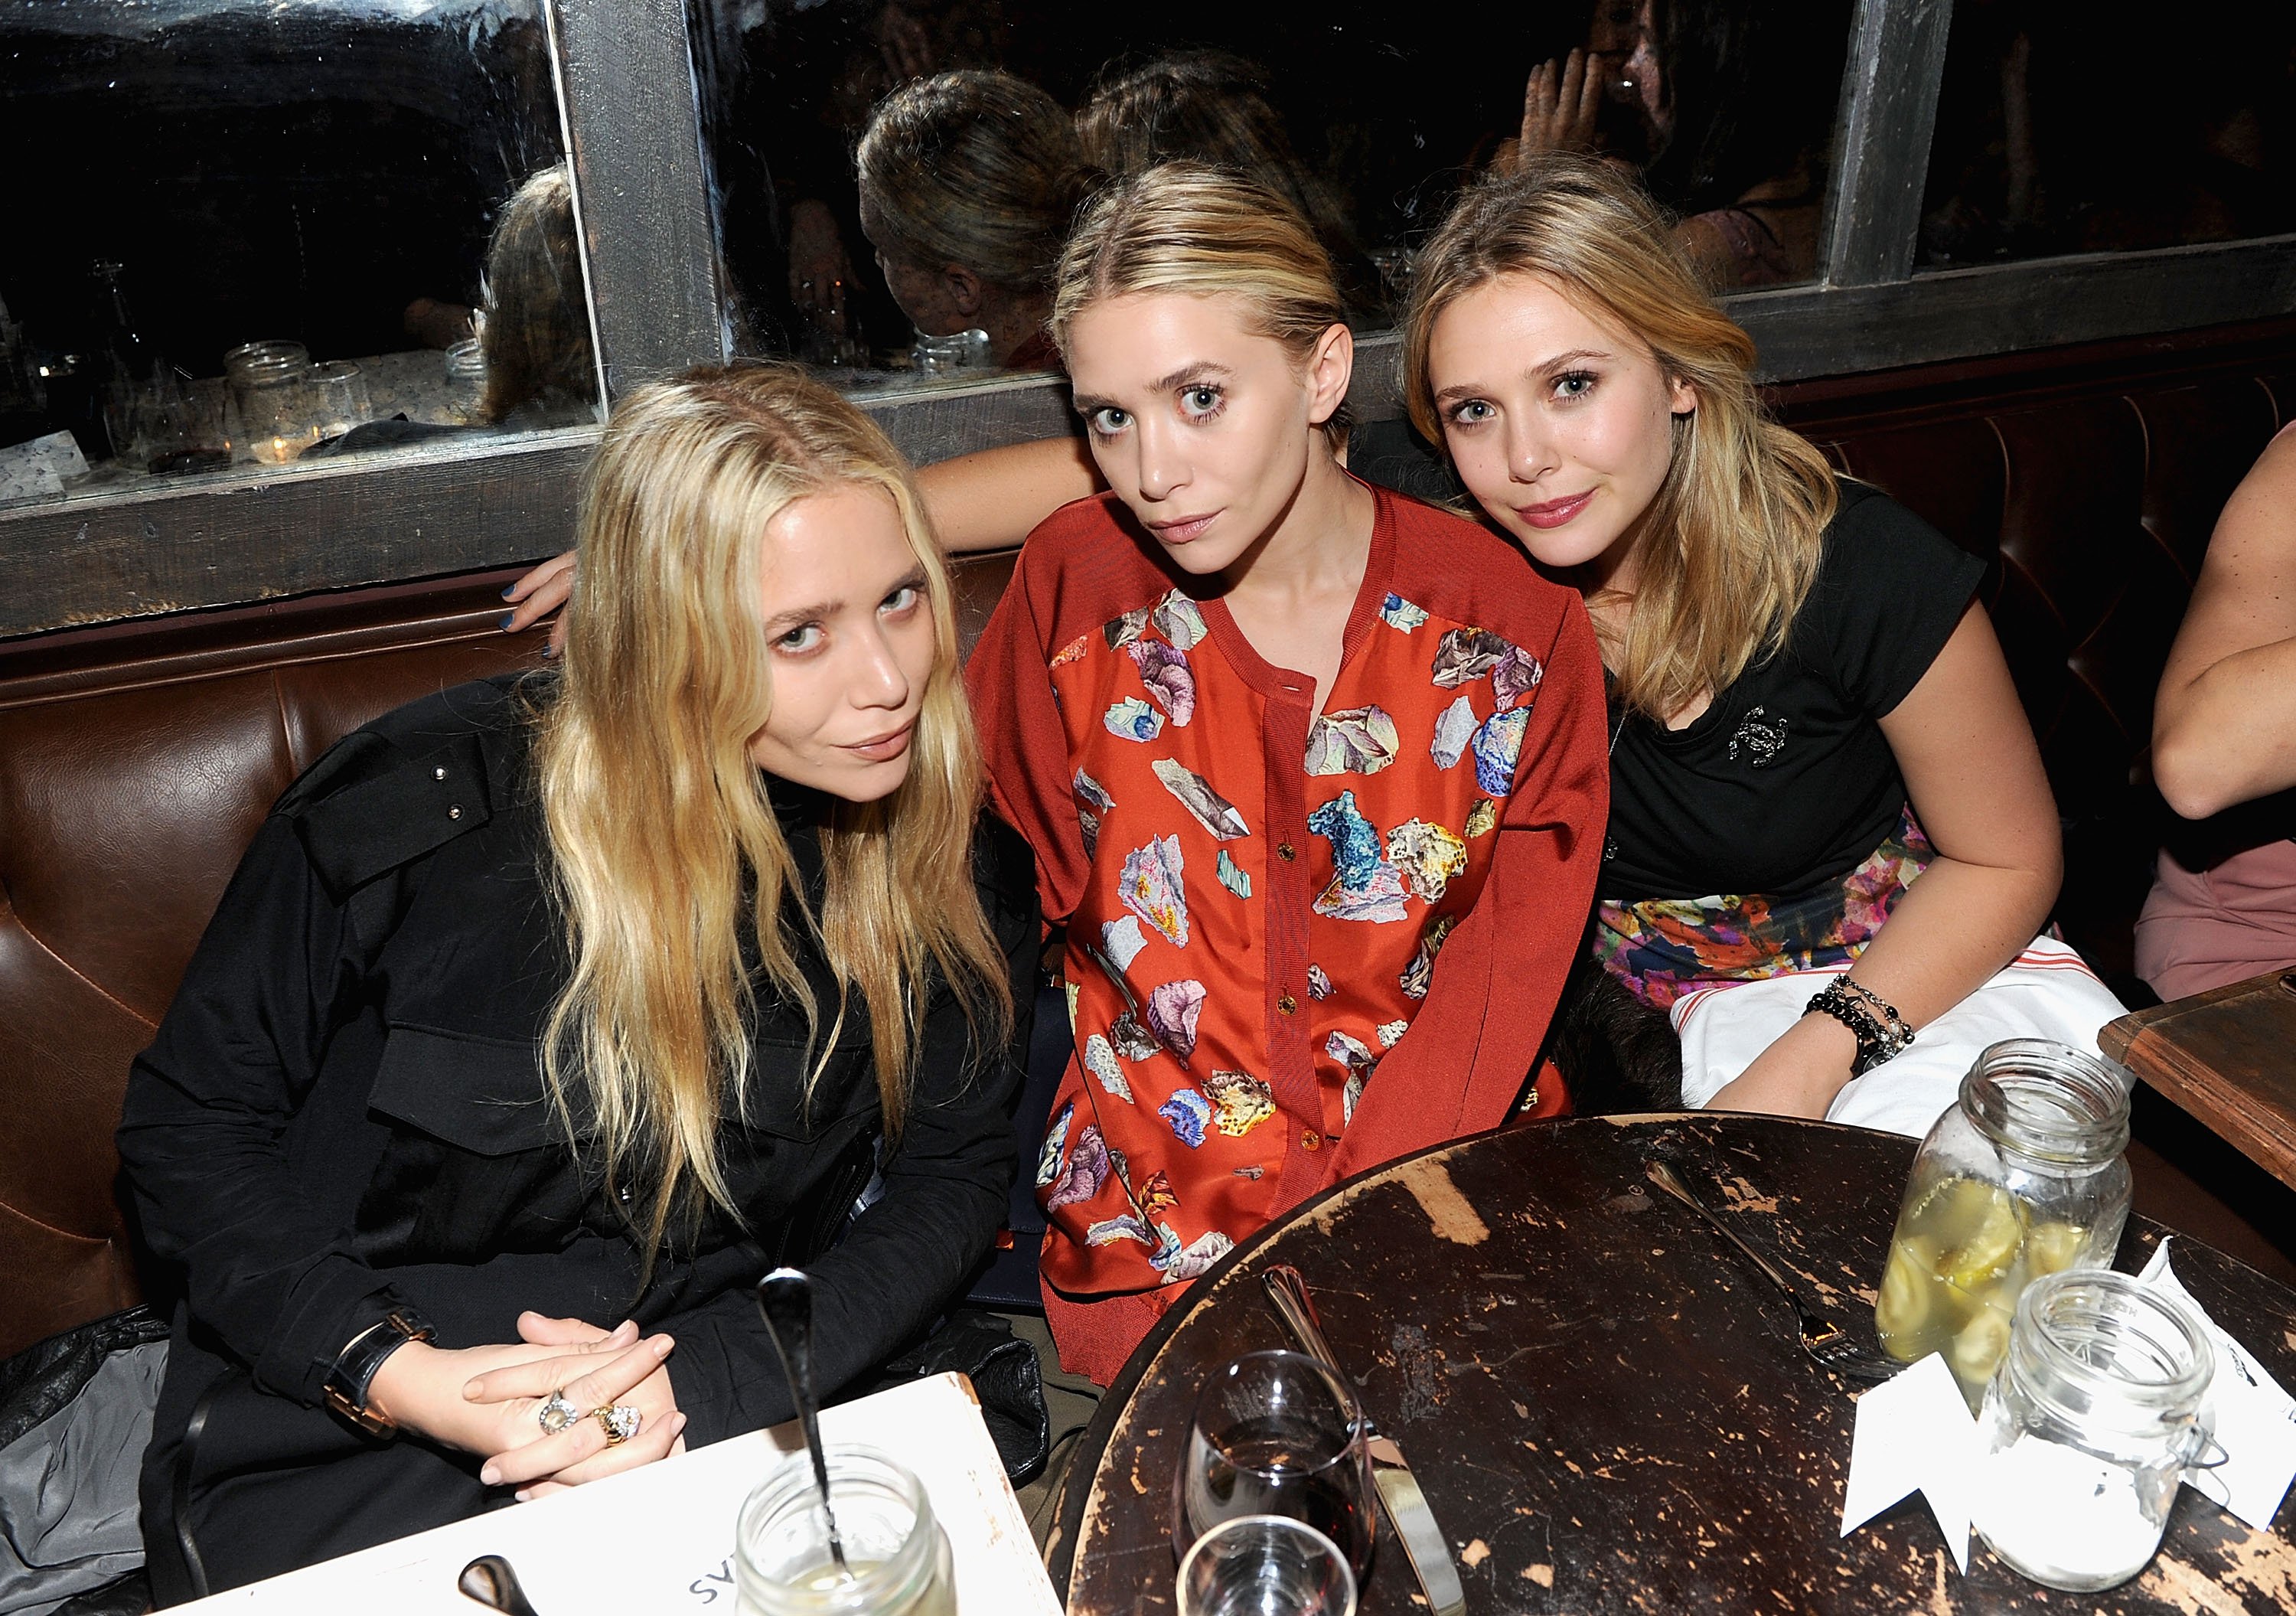 Elizabeth Olsen Says She Never Grew Out Of Wanting To Look Like Mary Kate And Ashley Olsen